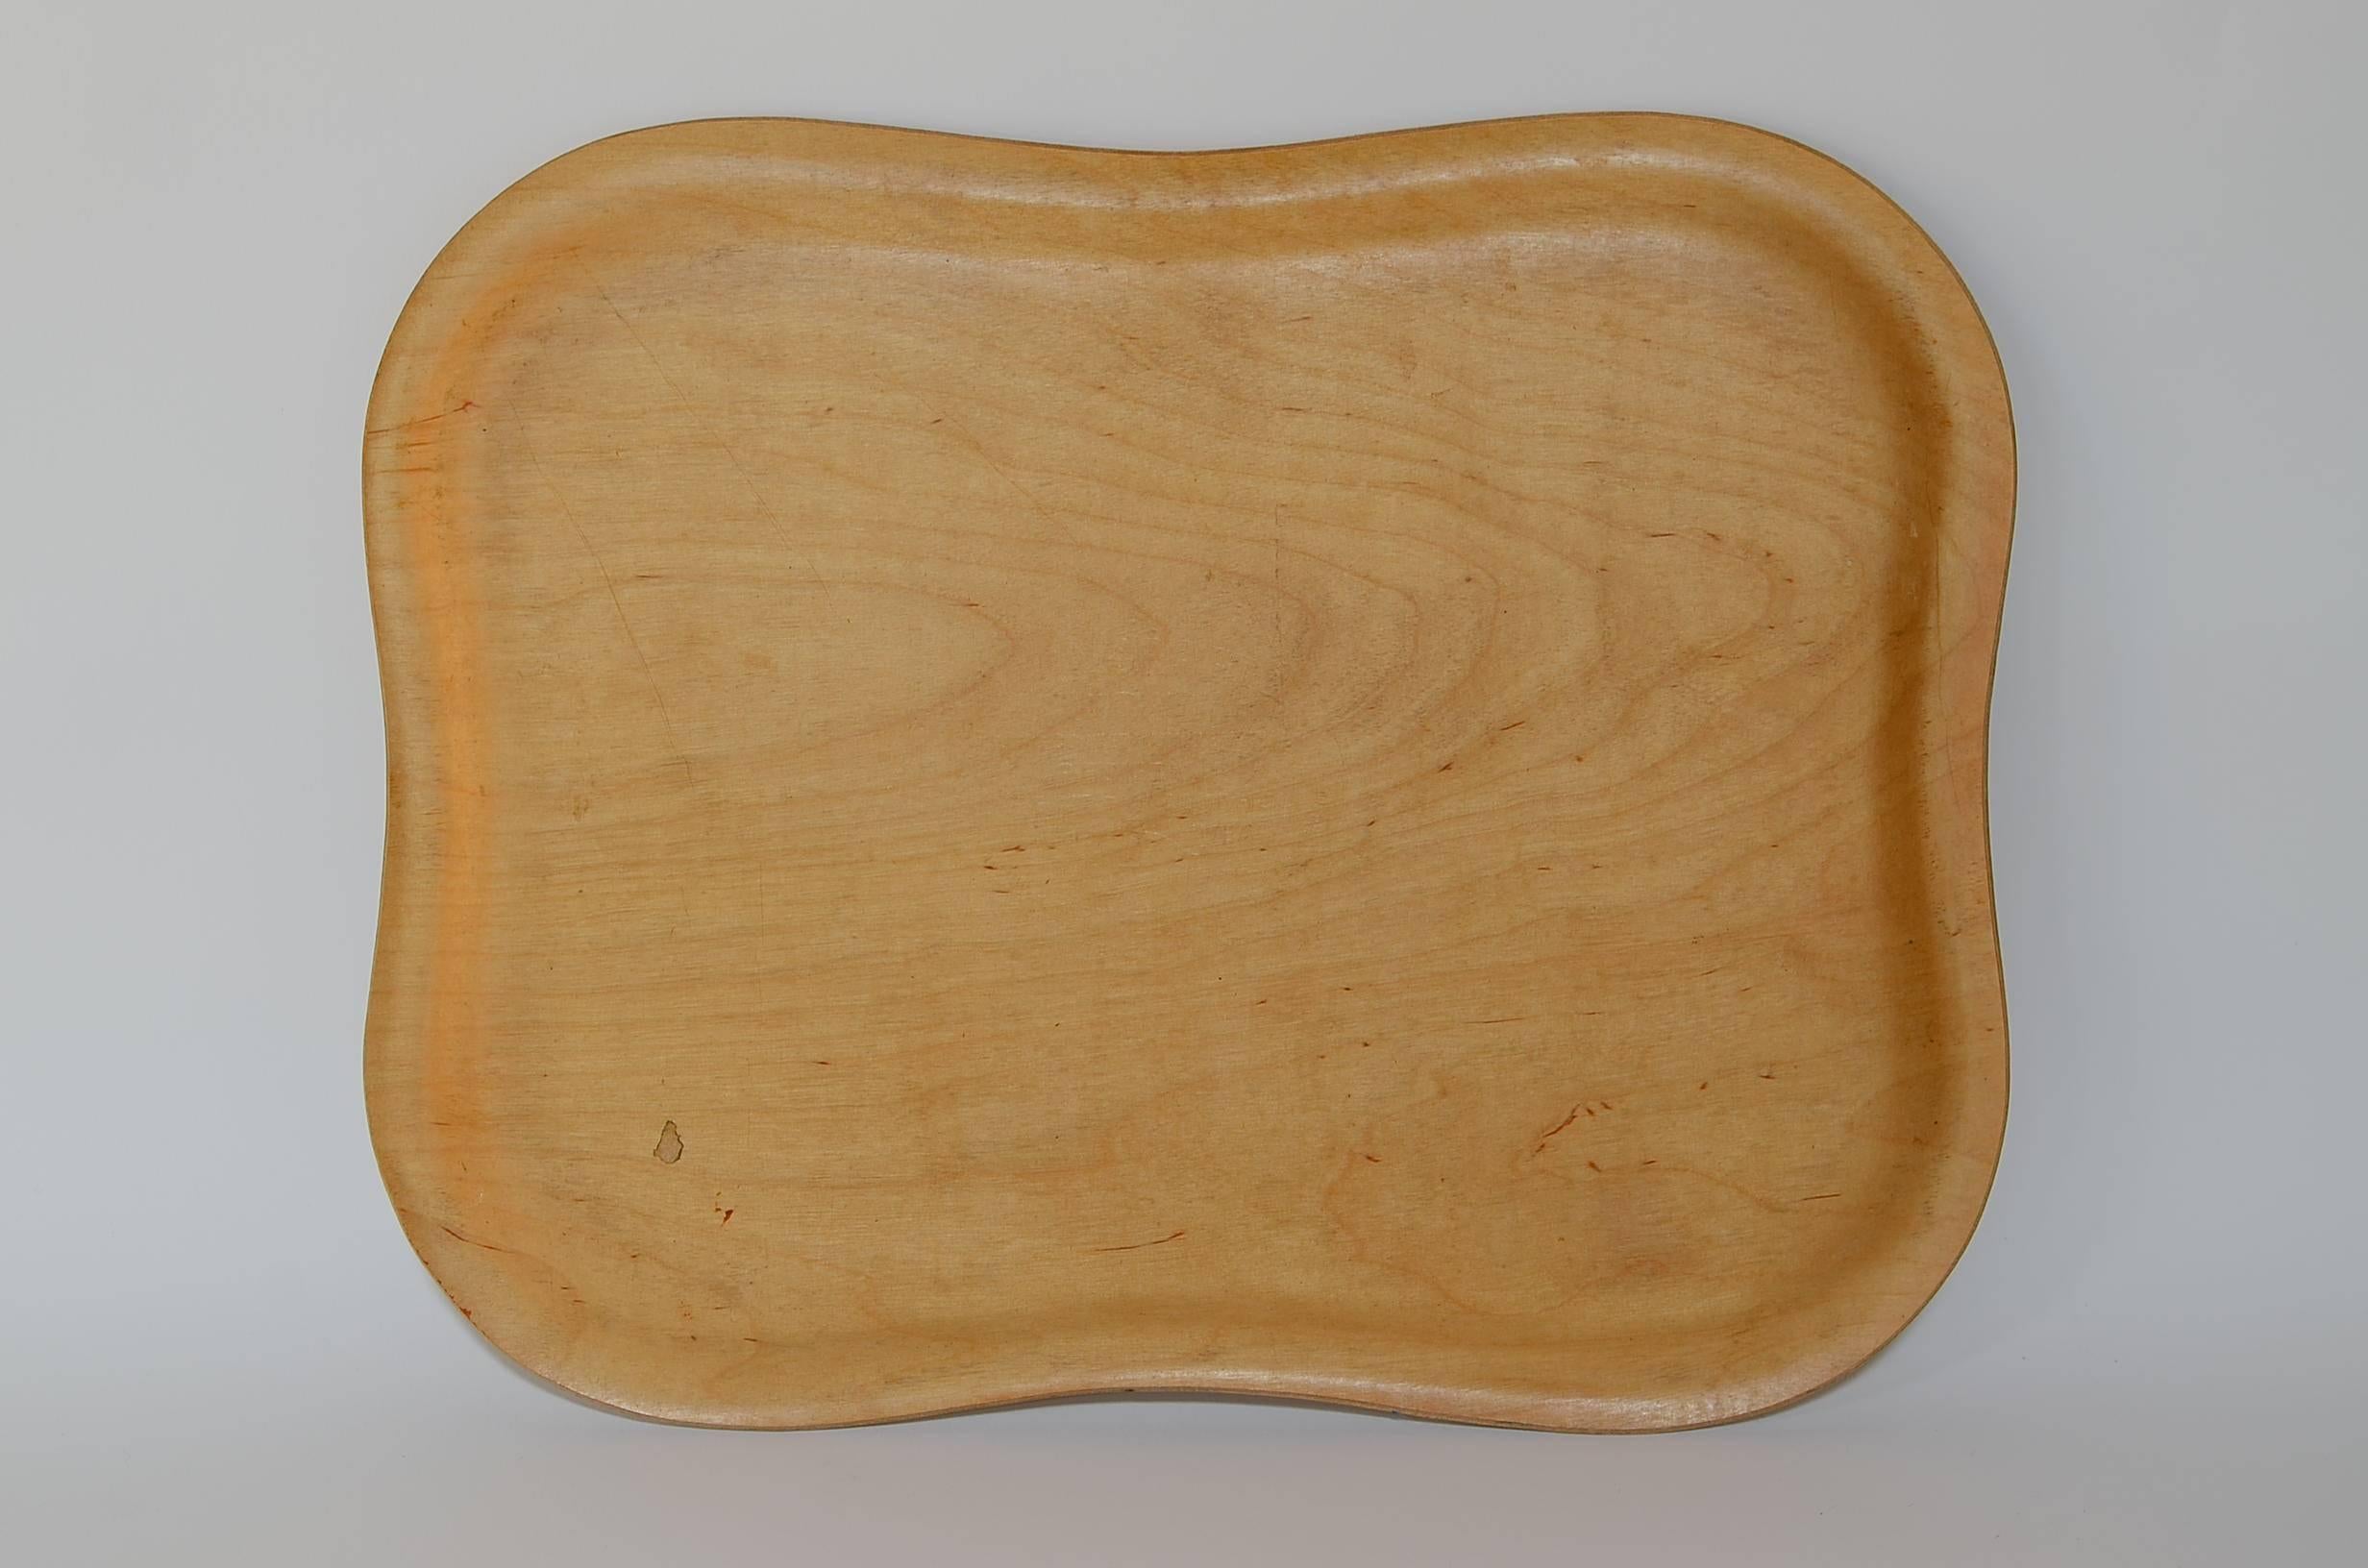 Beautiful organic shaped plywood trays designed by Tapio Wirkkala for Soinne et Kni, Helsinki. Soinne was the same company who produced the famous plywood leaf dishes for Wirkkala. Four available.